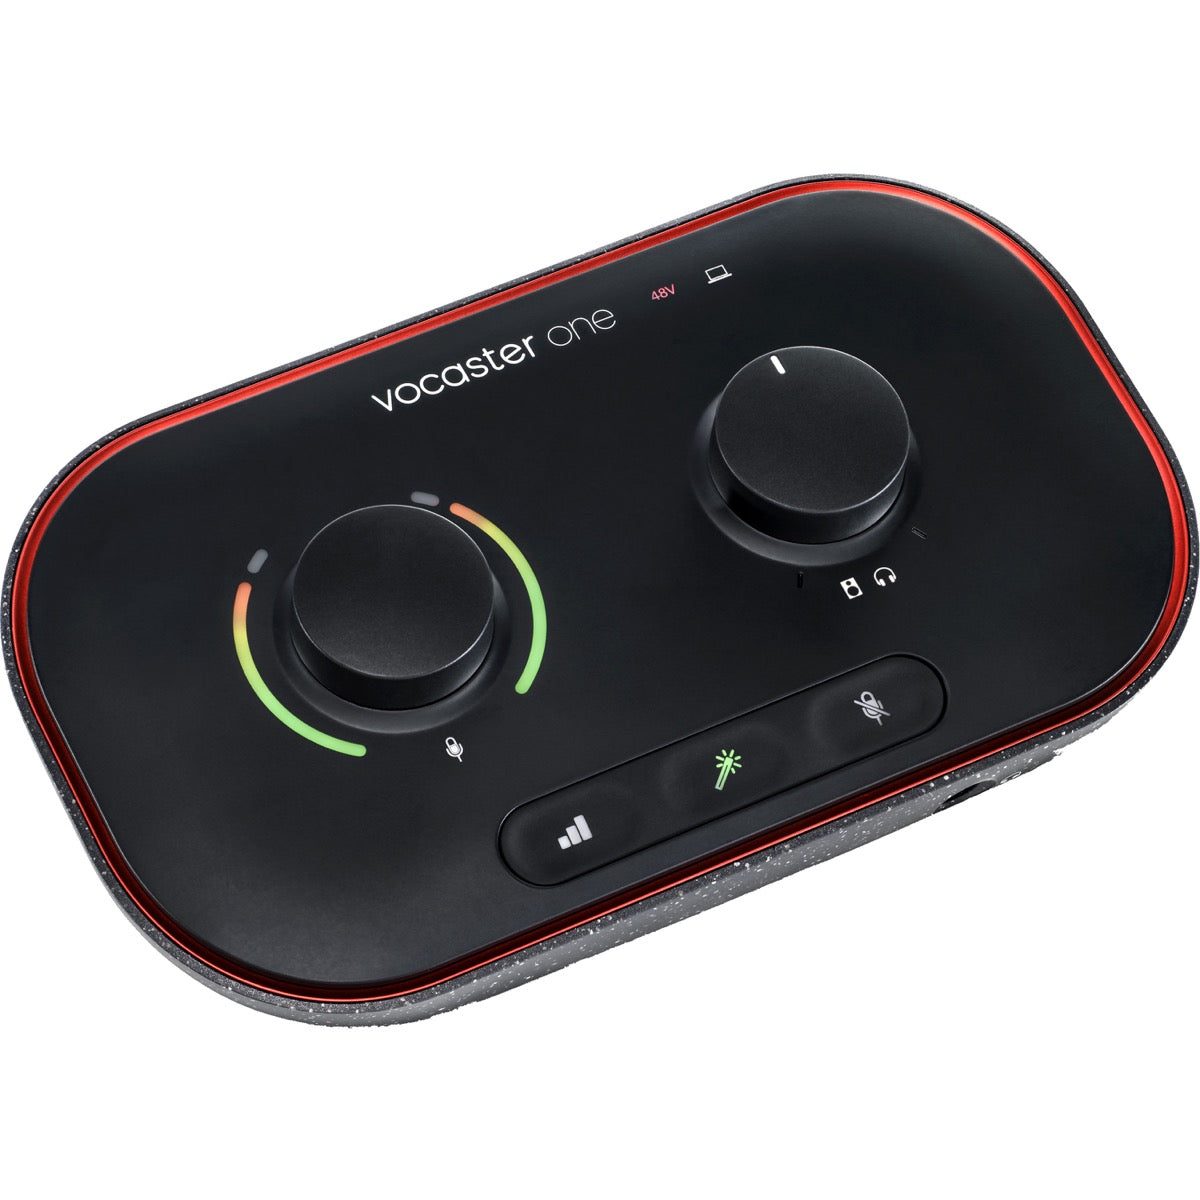 Focusrite Vocaster One Podcast Audio Interface View 3